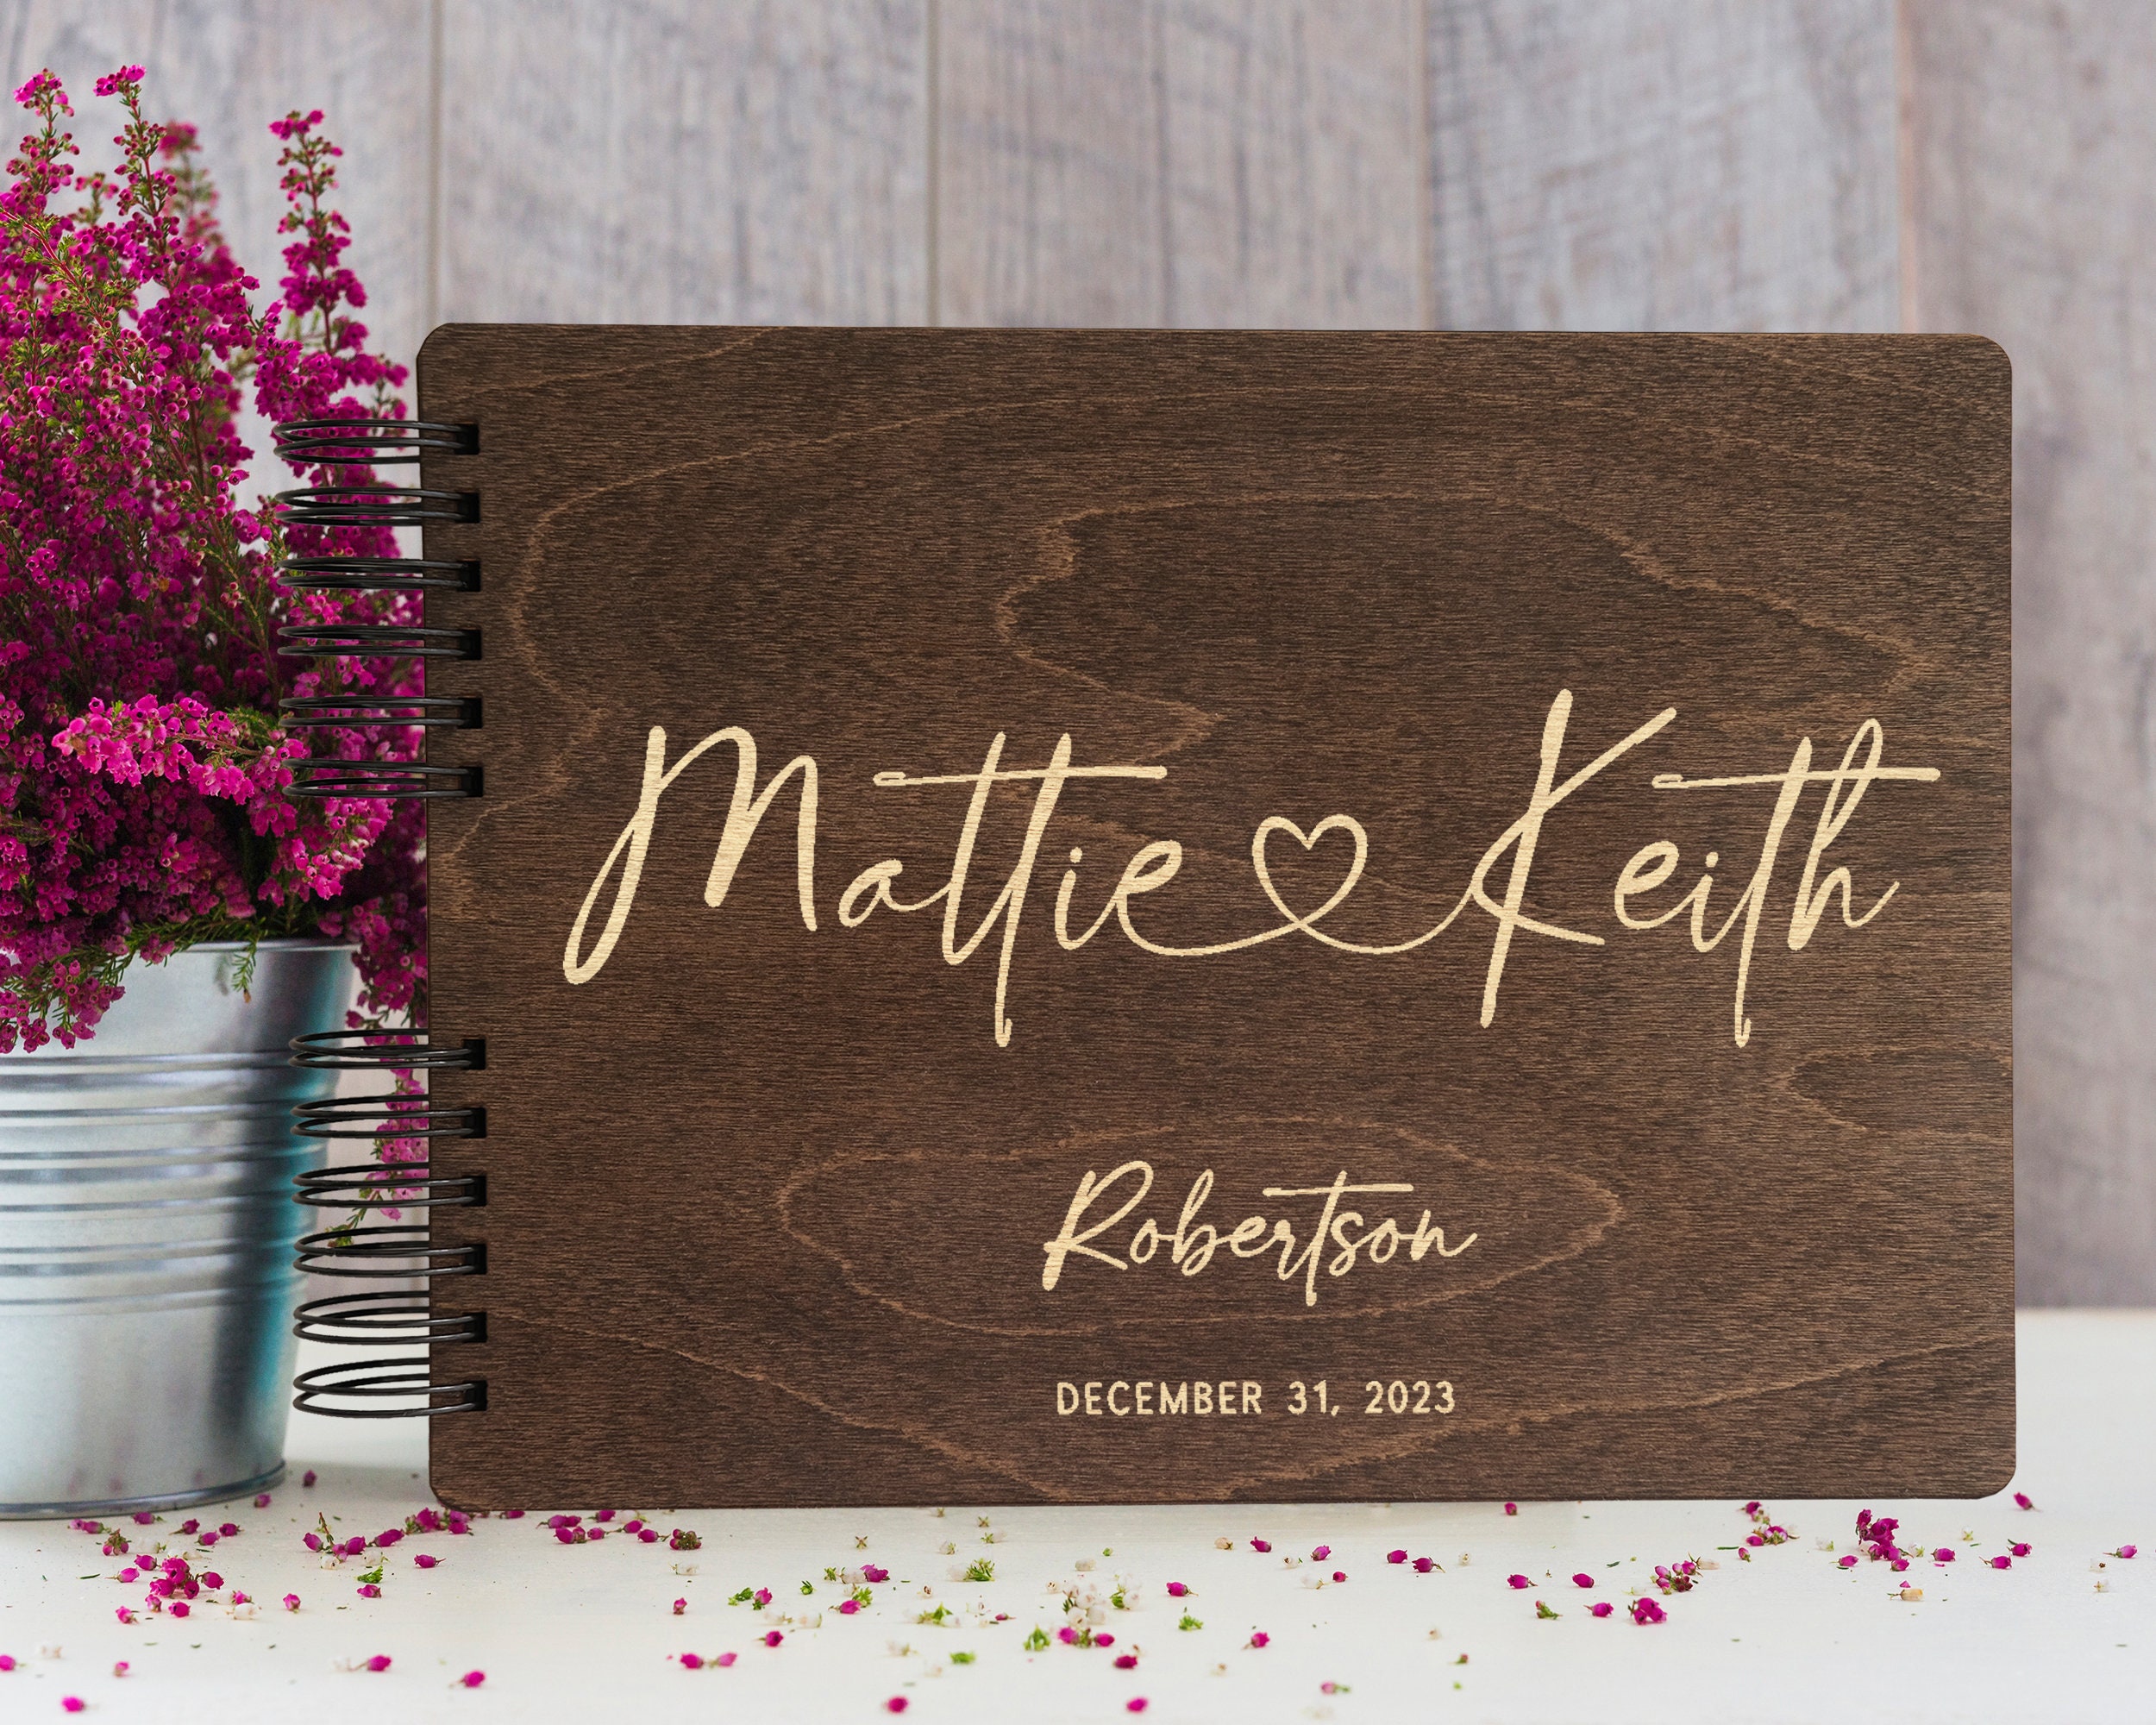 Original Wedding Guest Book - Rustic Weddings Reception Sign In Guestbook  100 Pages for Baby Shower, Birthday, Polaroid Photos - Elegant Hardcover